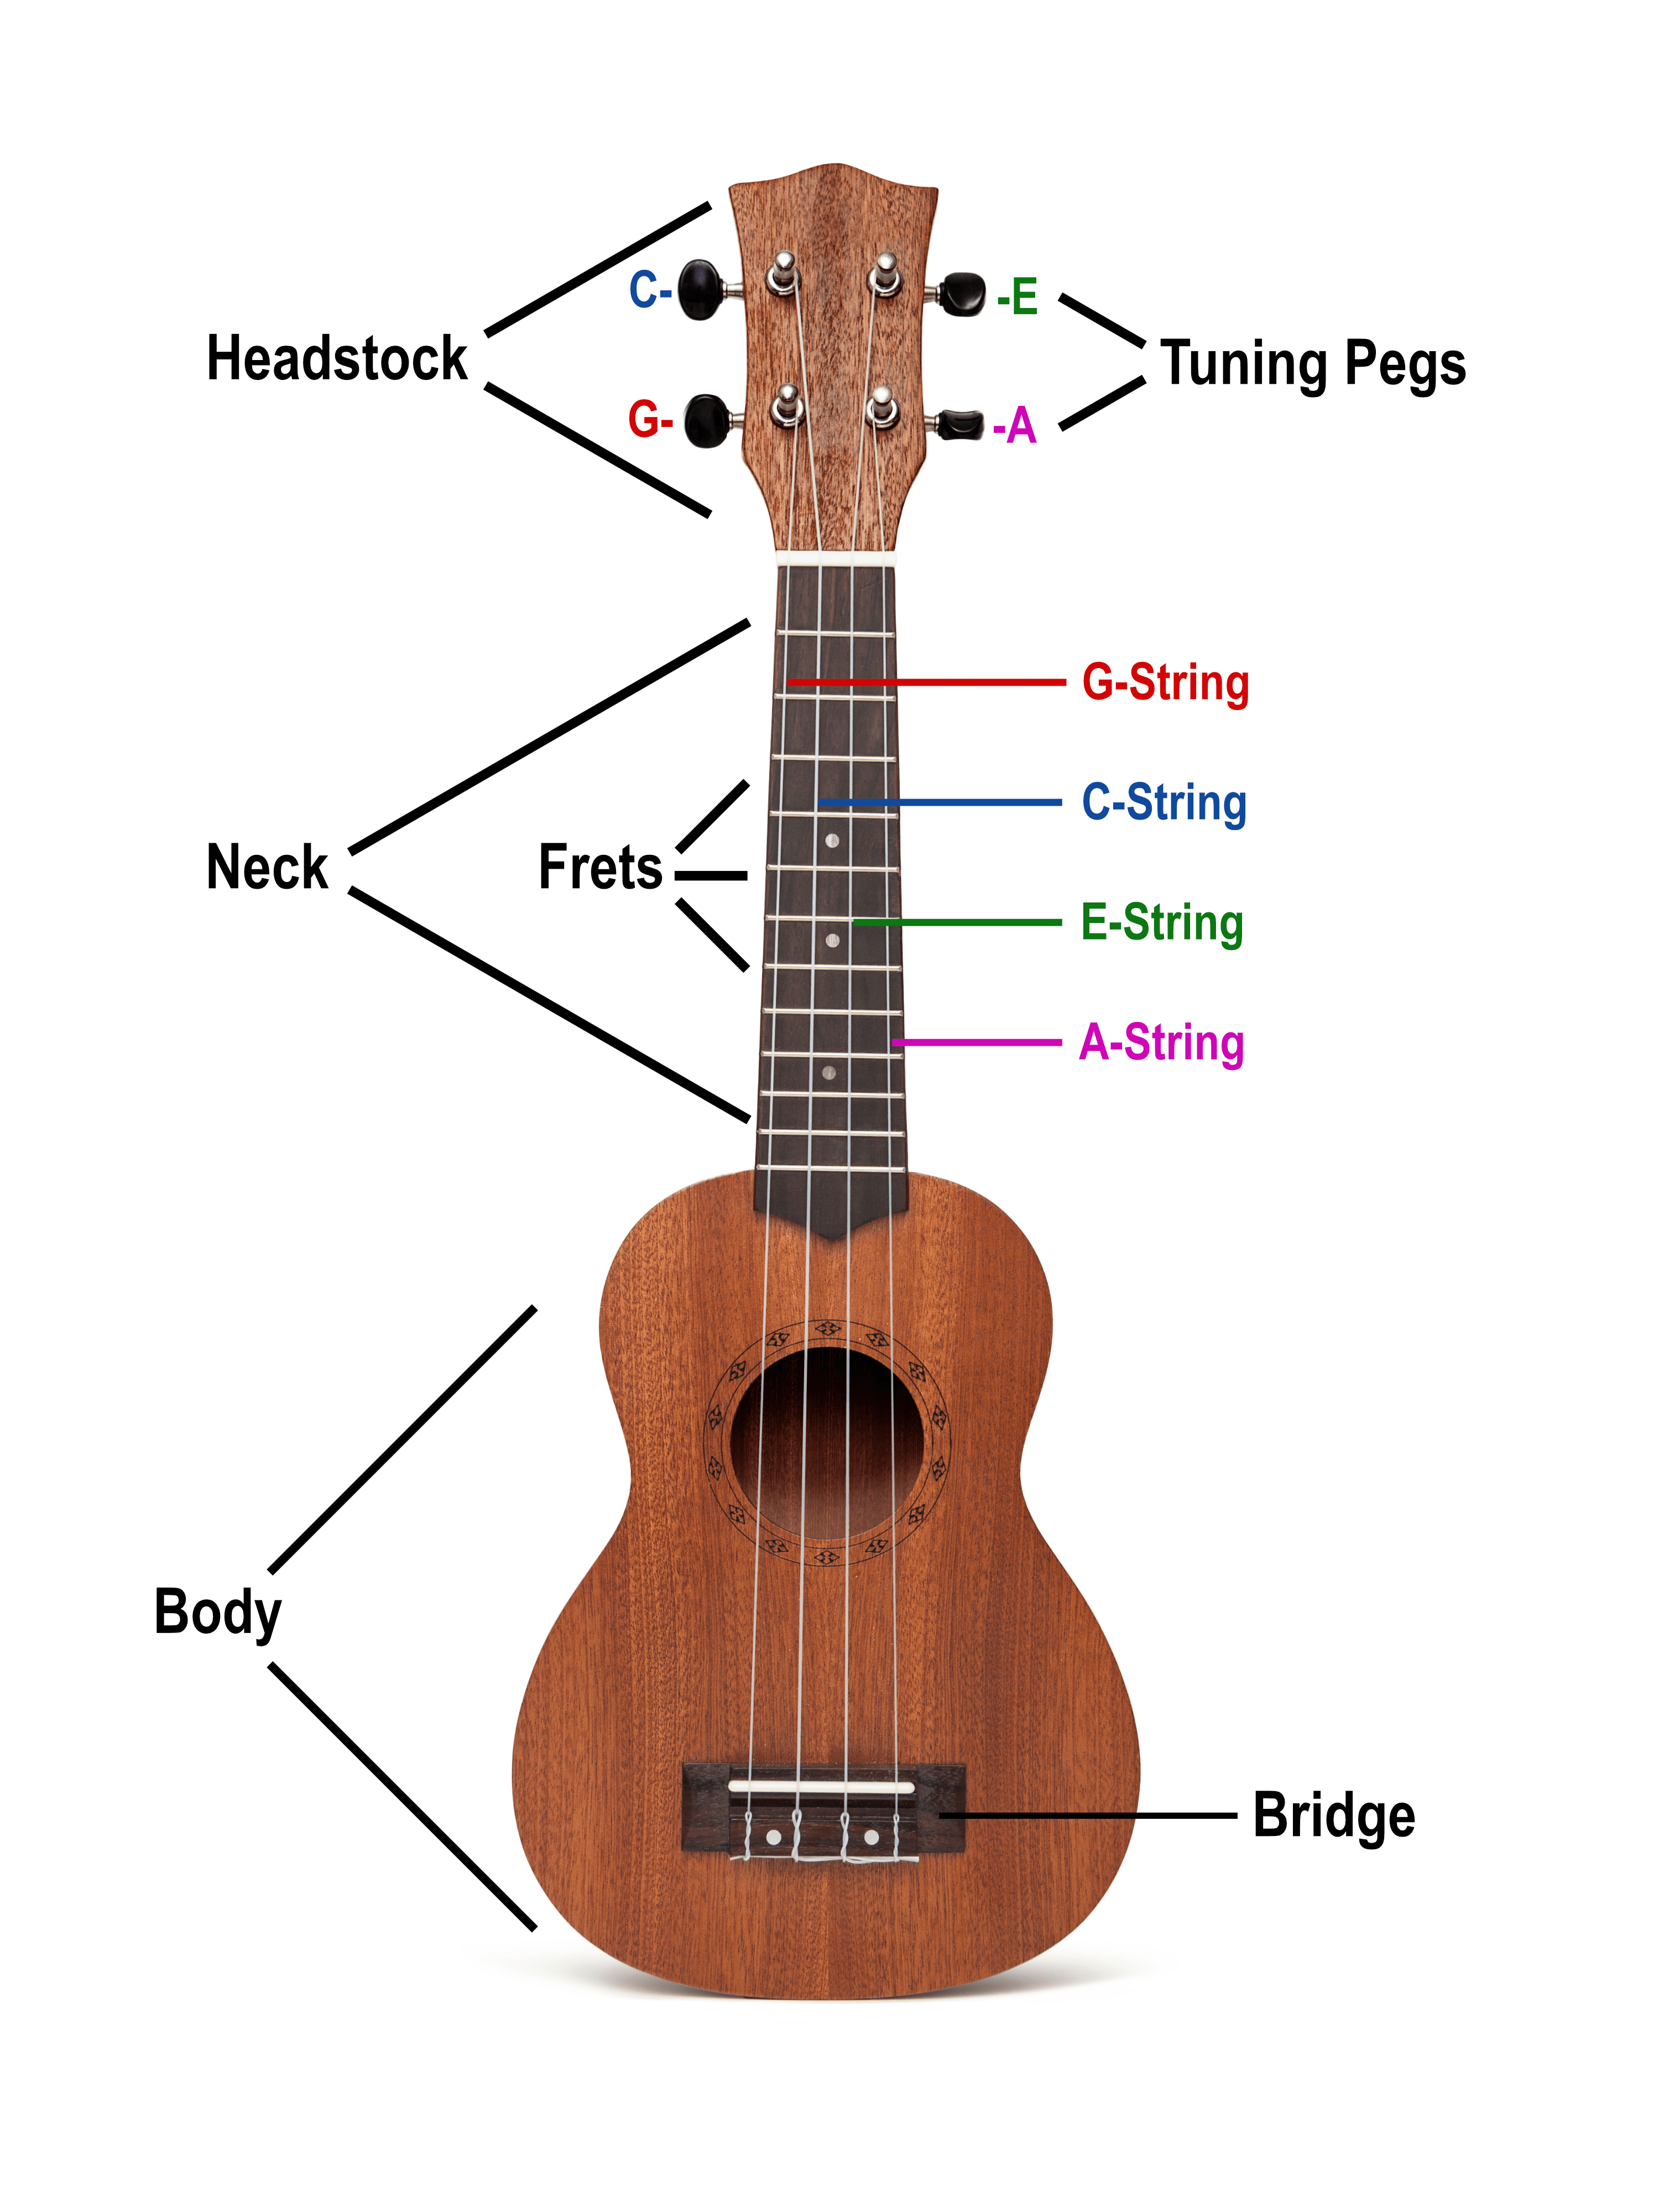 Ukulele Tuning Guide - Ways to Tune It & How to do It